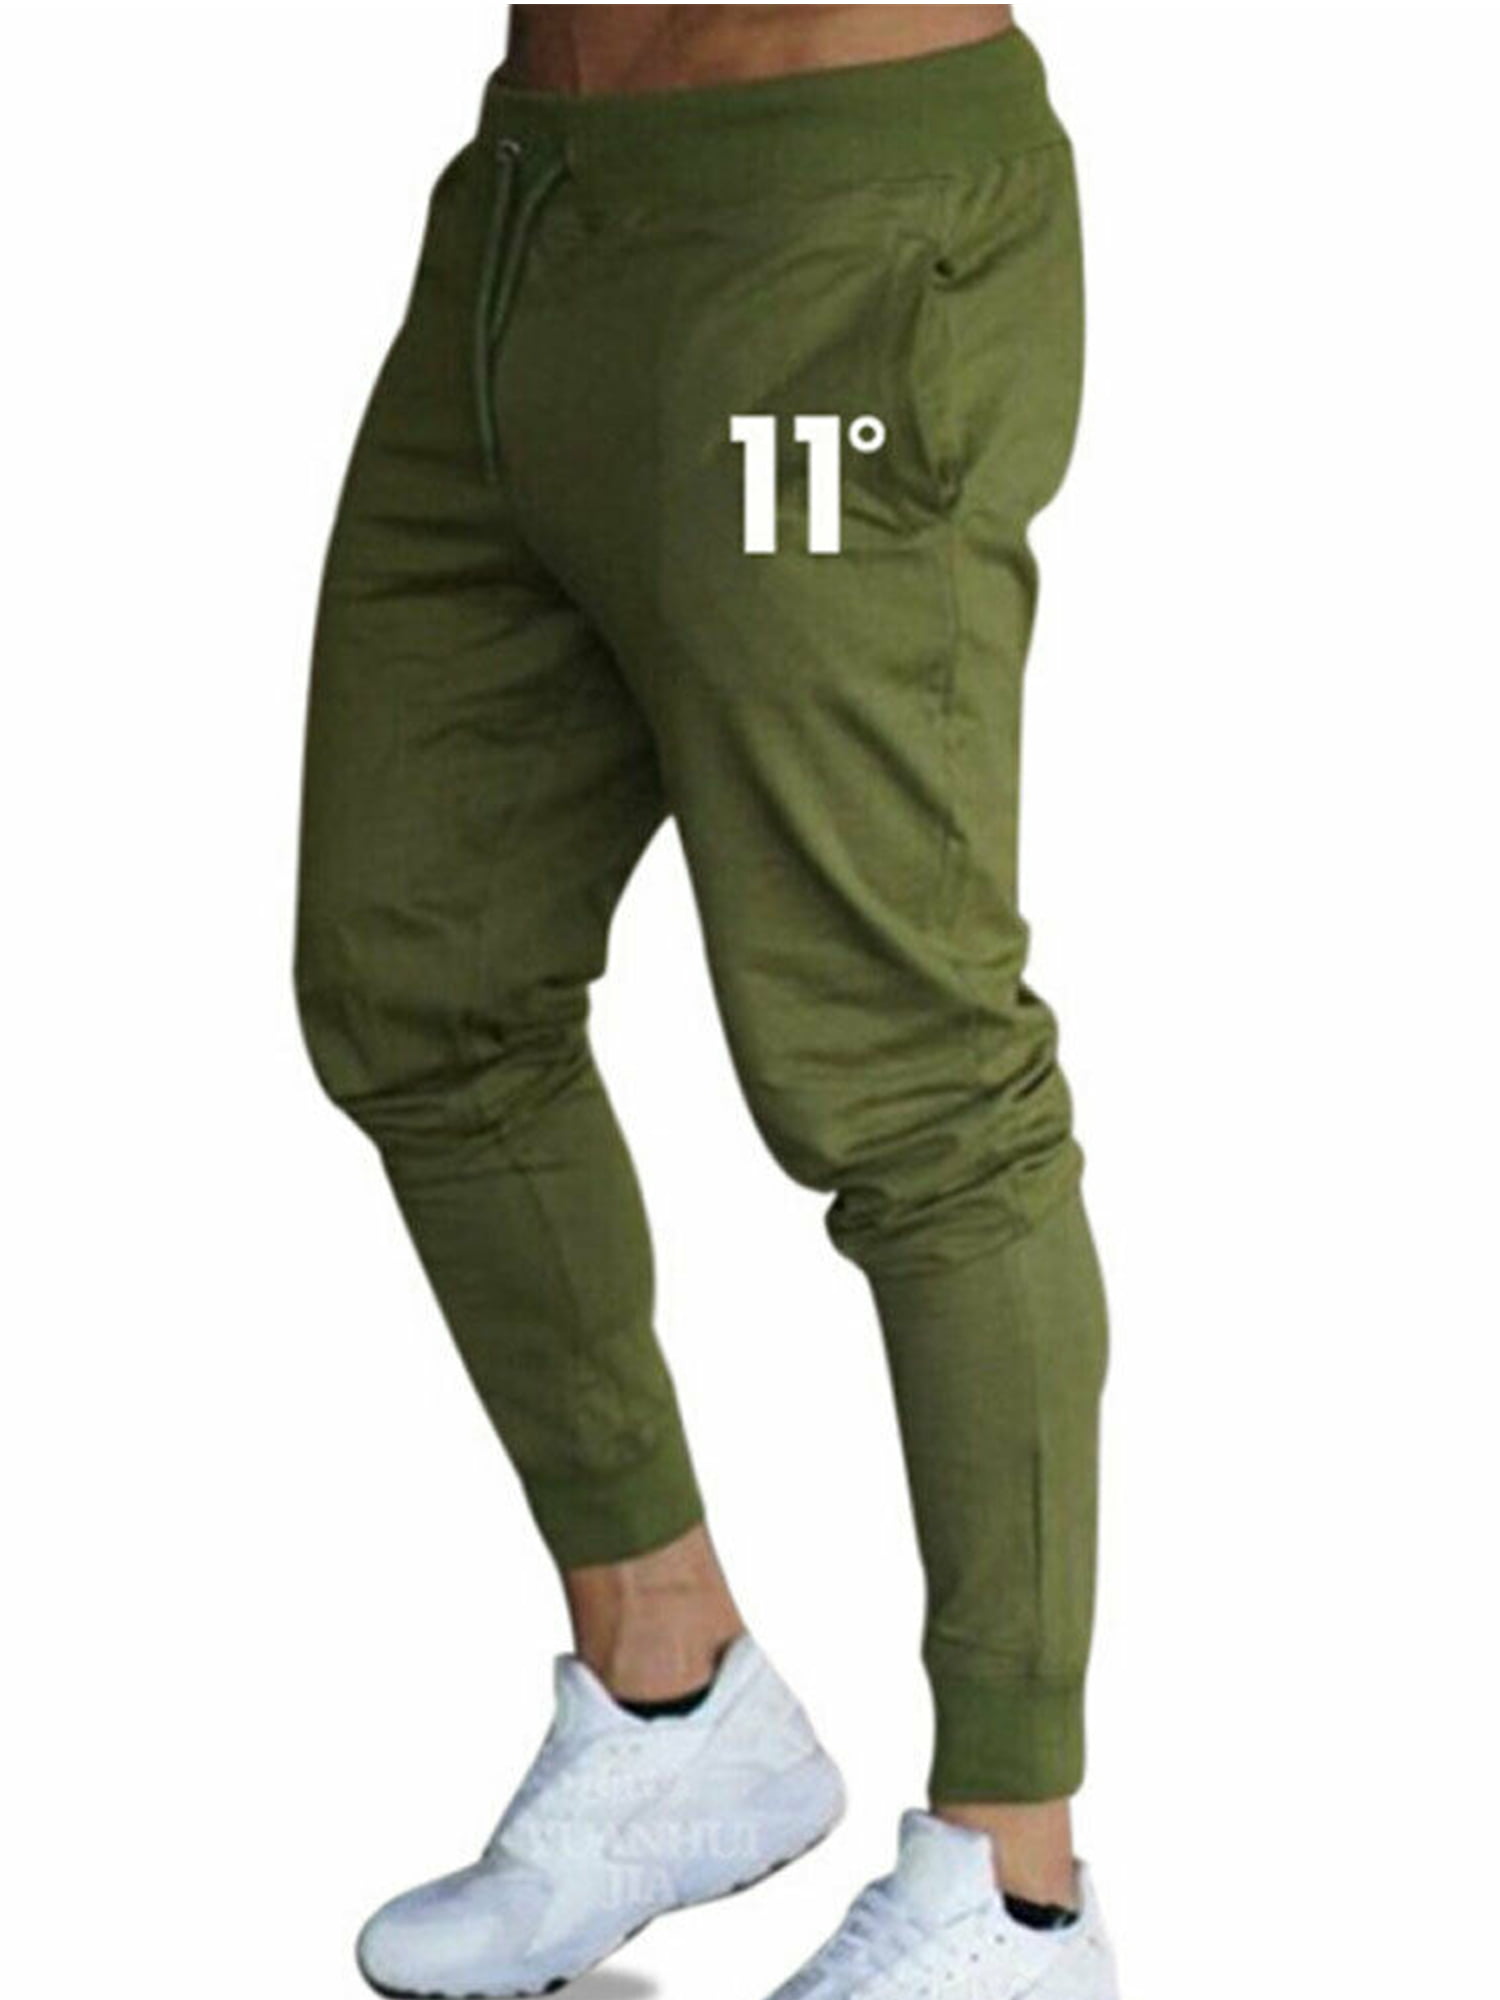 Mens Tracksuit Bottoms Pant Mesh Lining Gym Jogging Jogger Sweat Outdoor Trouser